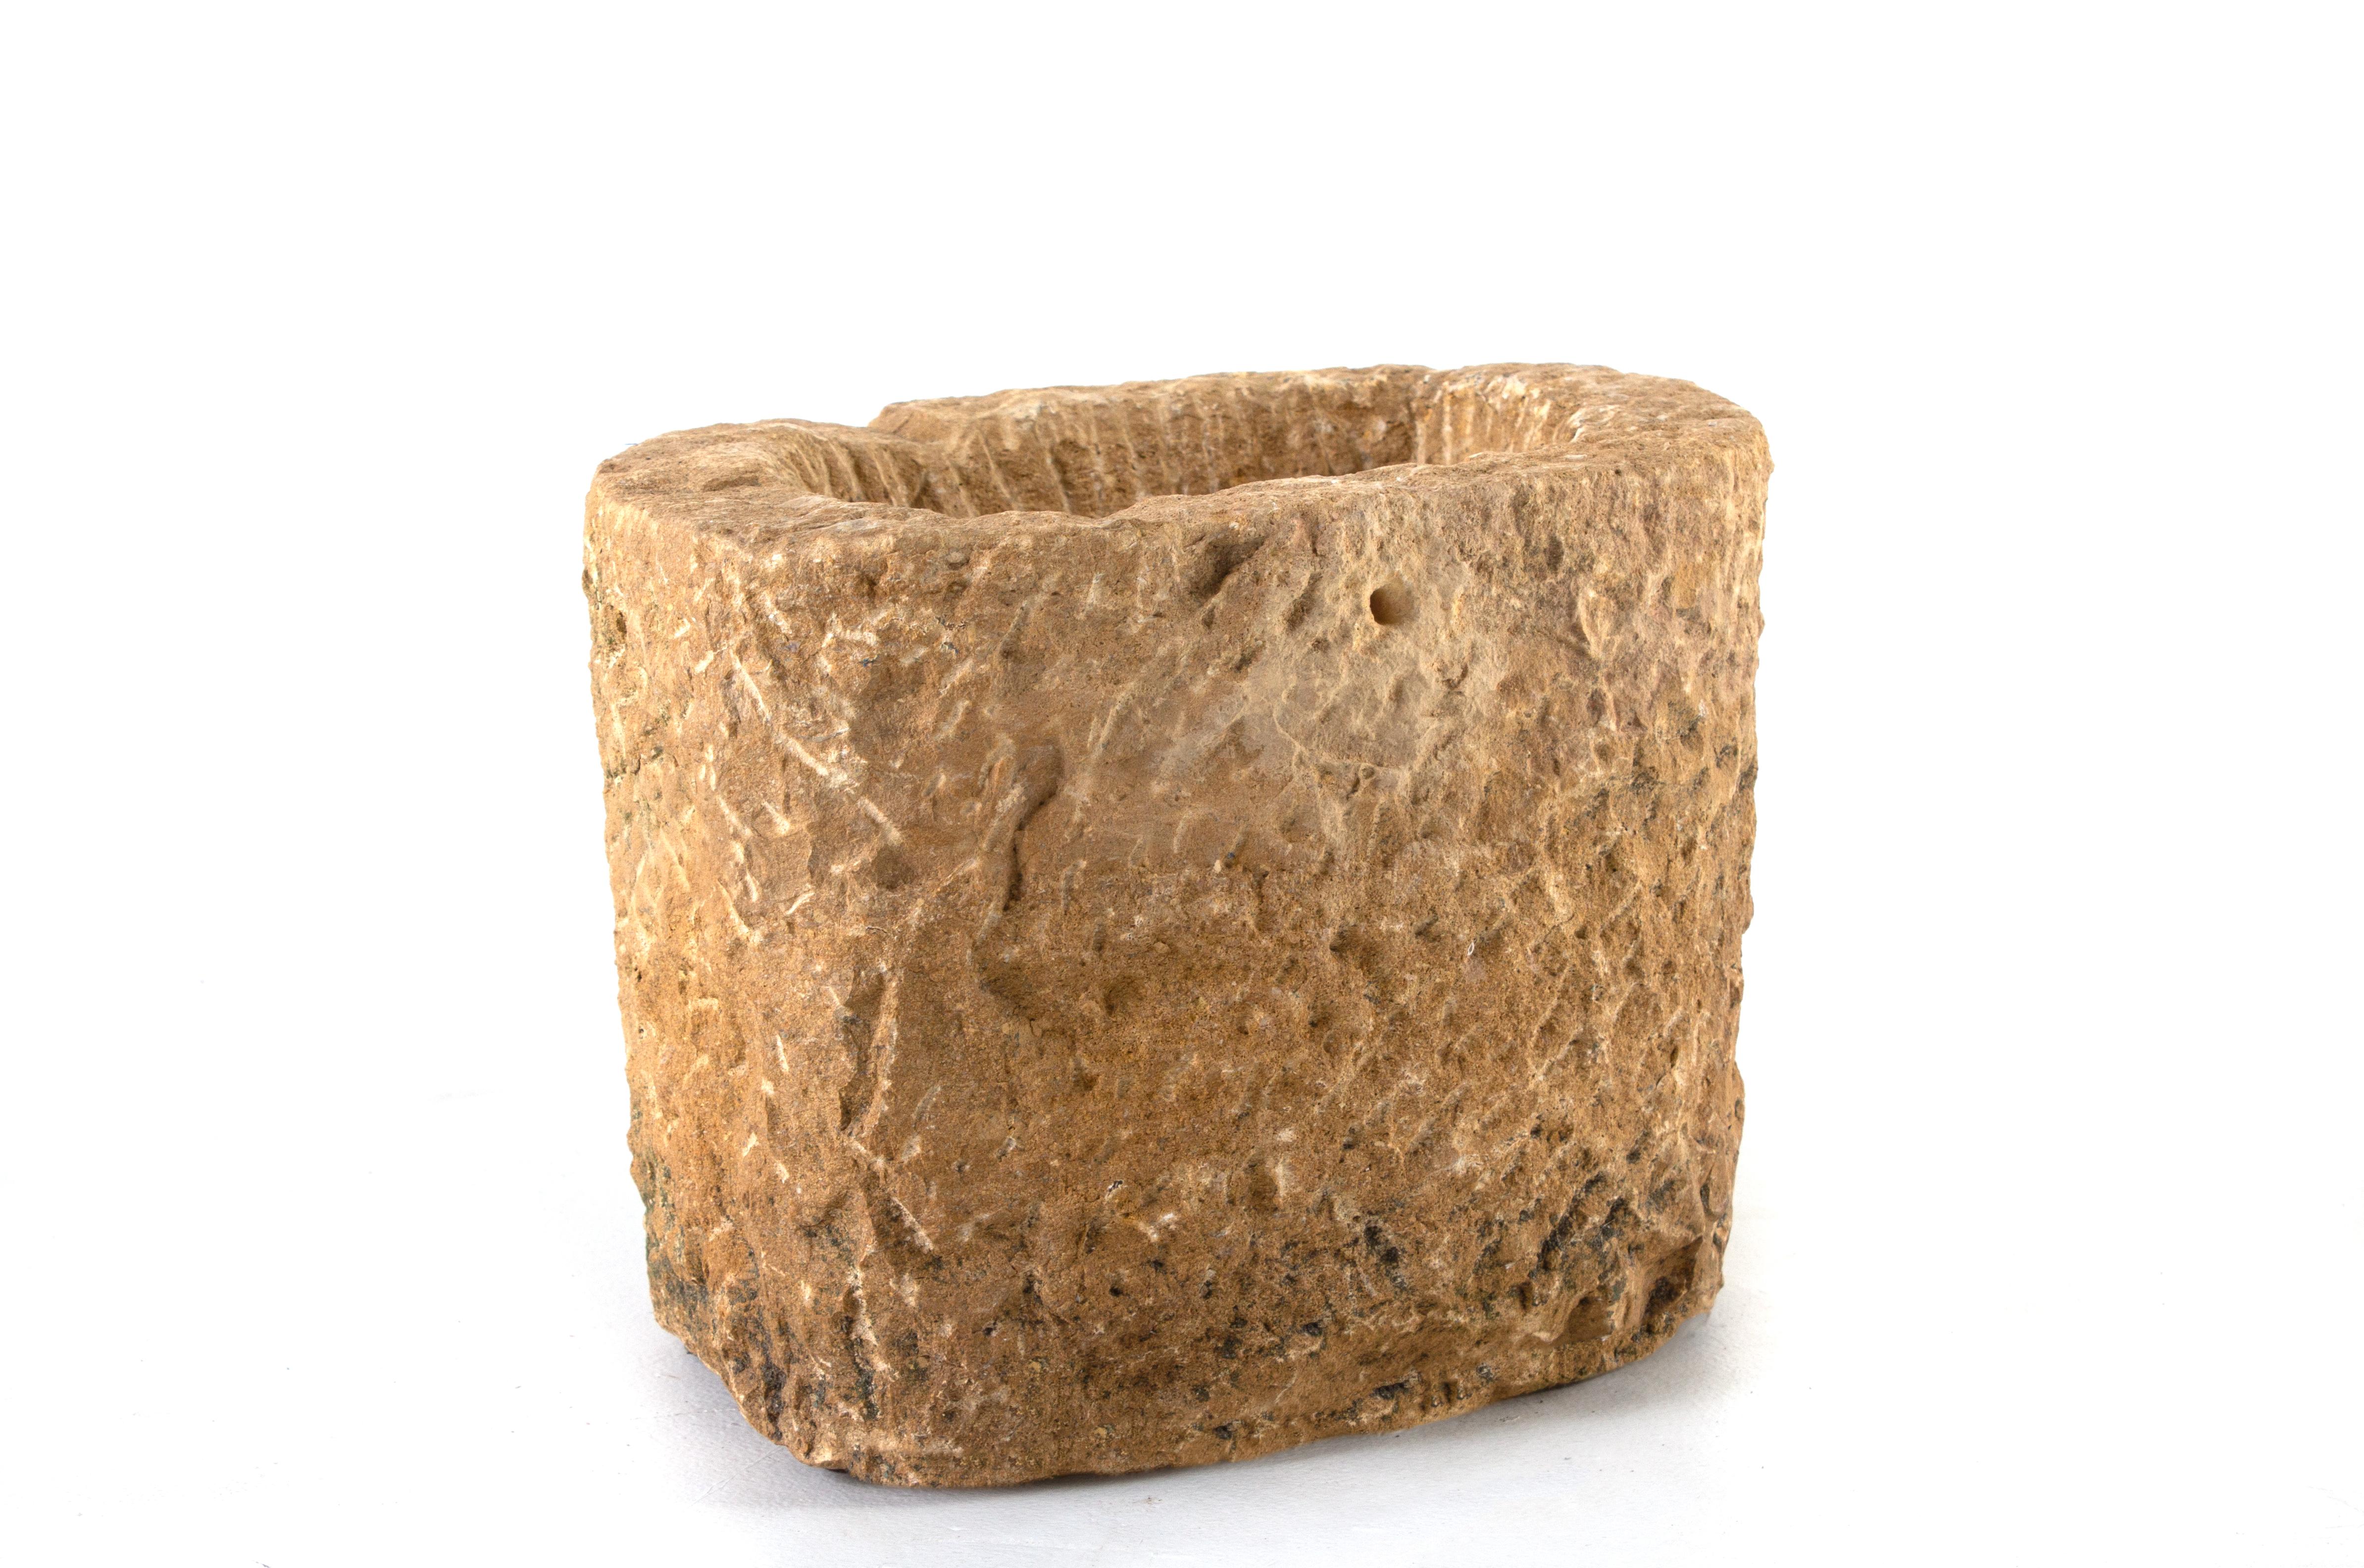 Hand carved stone milling bowl.

This piece is a part of Brendan Bass’s one-of-a-kind collection, Le Monde. French for “The World”, the Le Monde collection is made up of rare and hard to find pieces curated by Brendan from estate sales, brocantes,